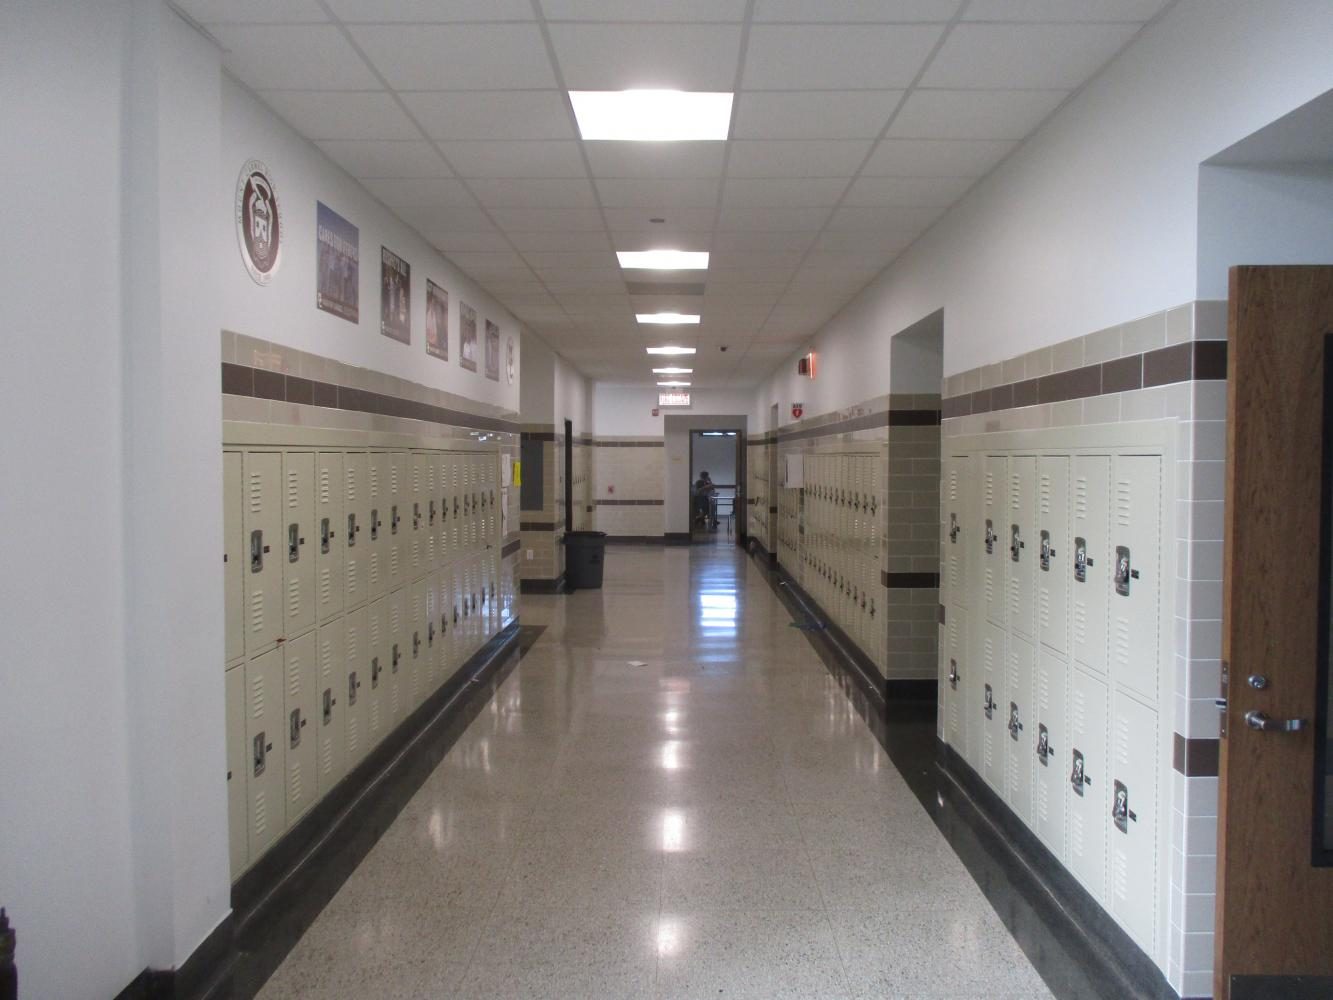 Mount Carmel students can expect information soon concerning when they can retrieve personal items from their lockers.  